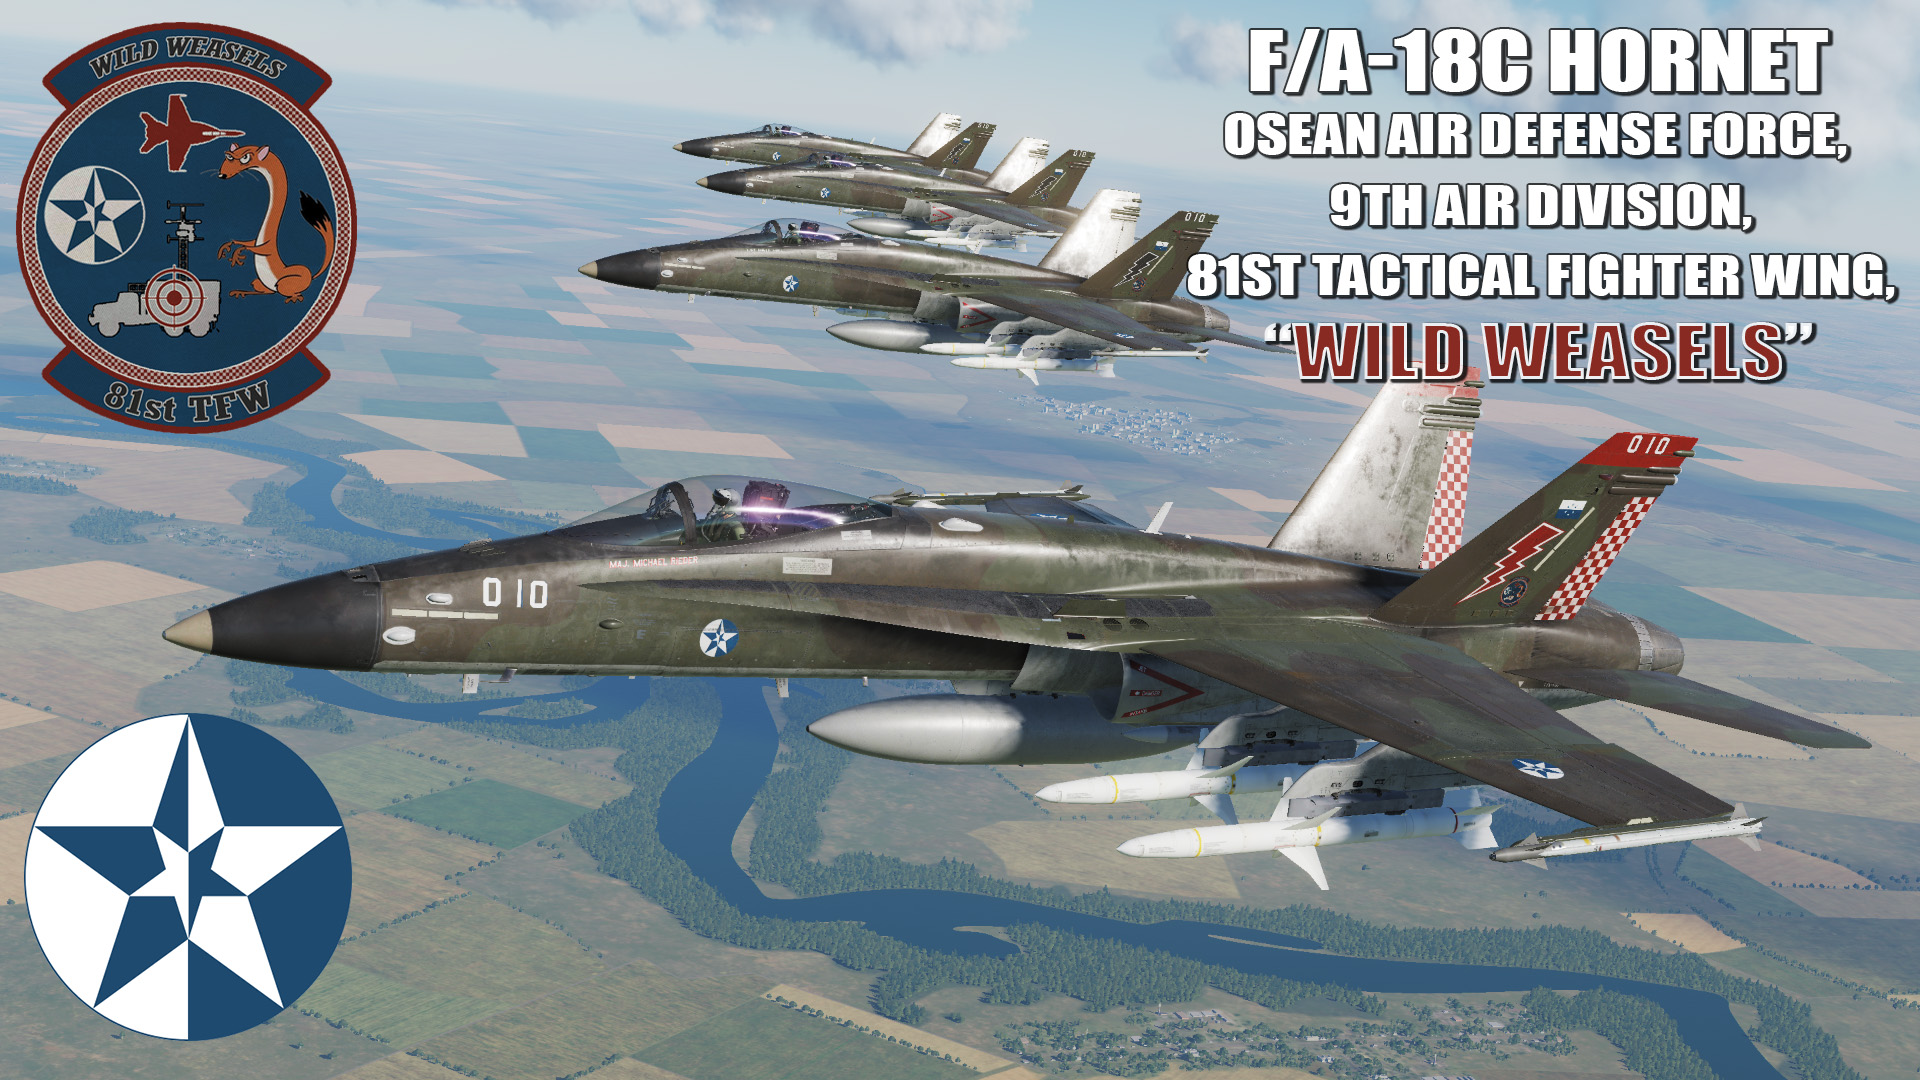 Ace Combat - Osean Air Defense Force 9th Air Division, 81st TFW "Wild Weasels" F/A-18C Hornet